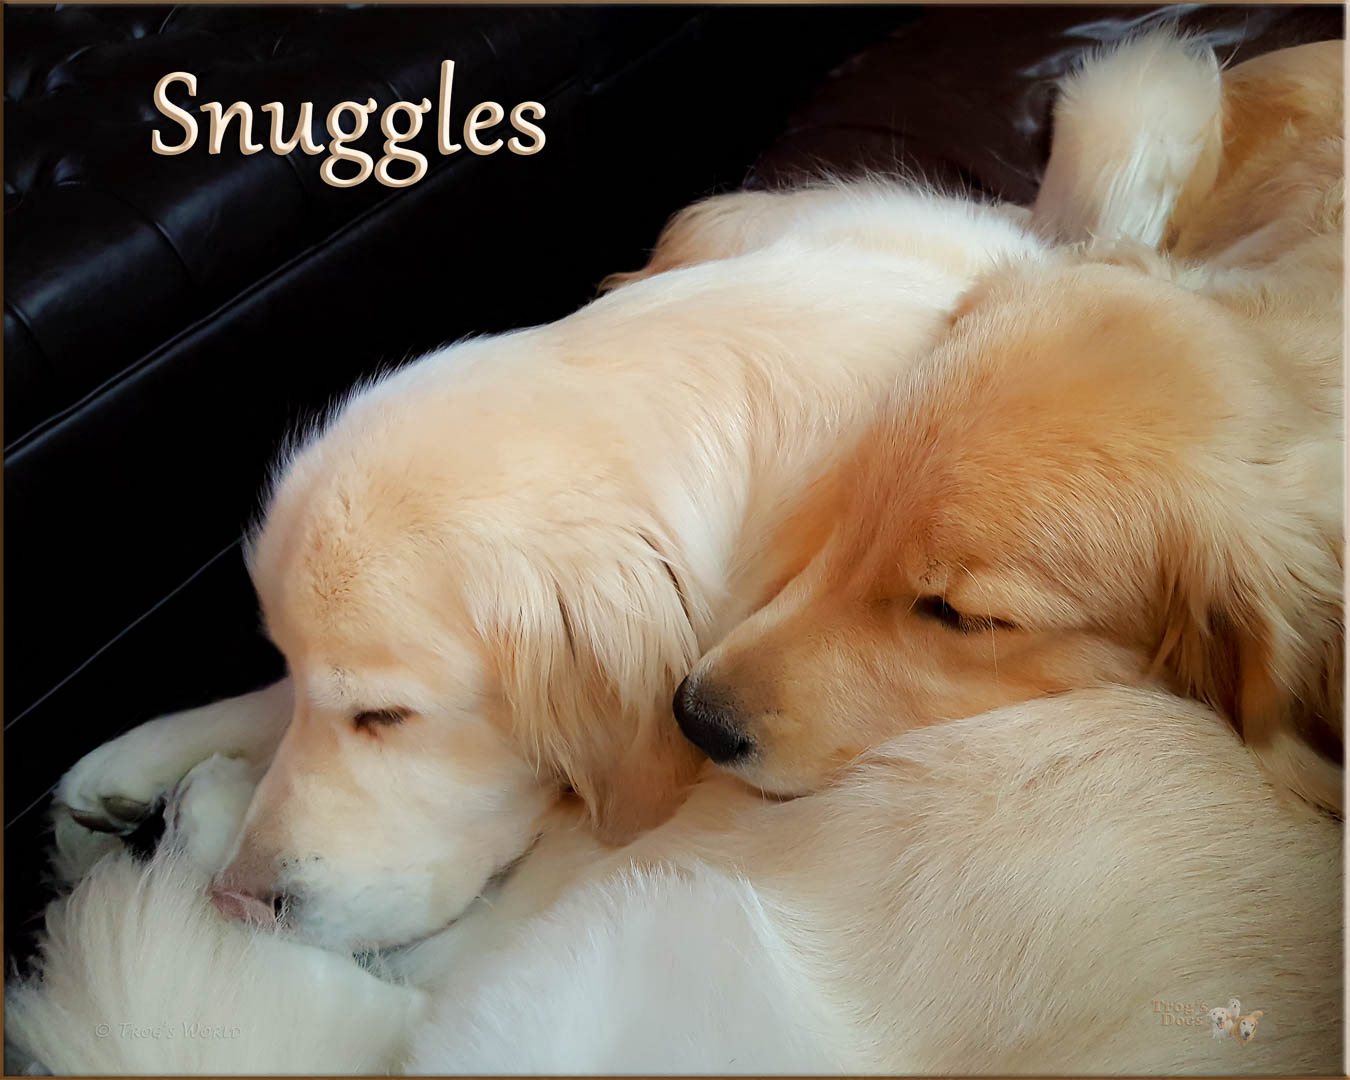 Golden Retrievers snuggling on a couch